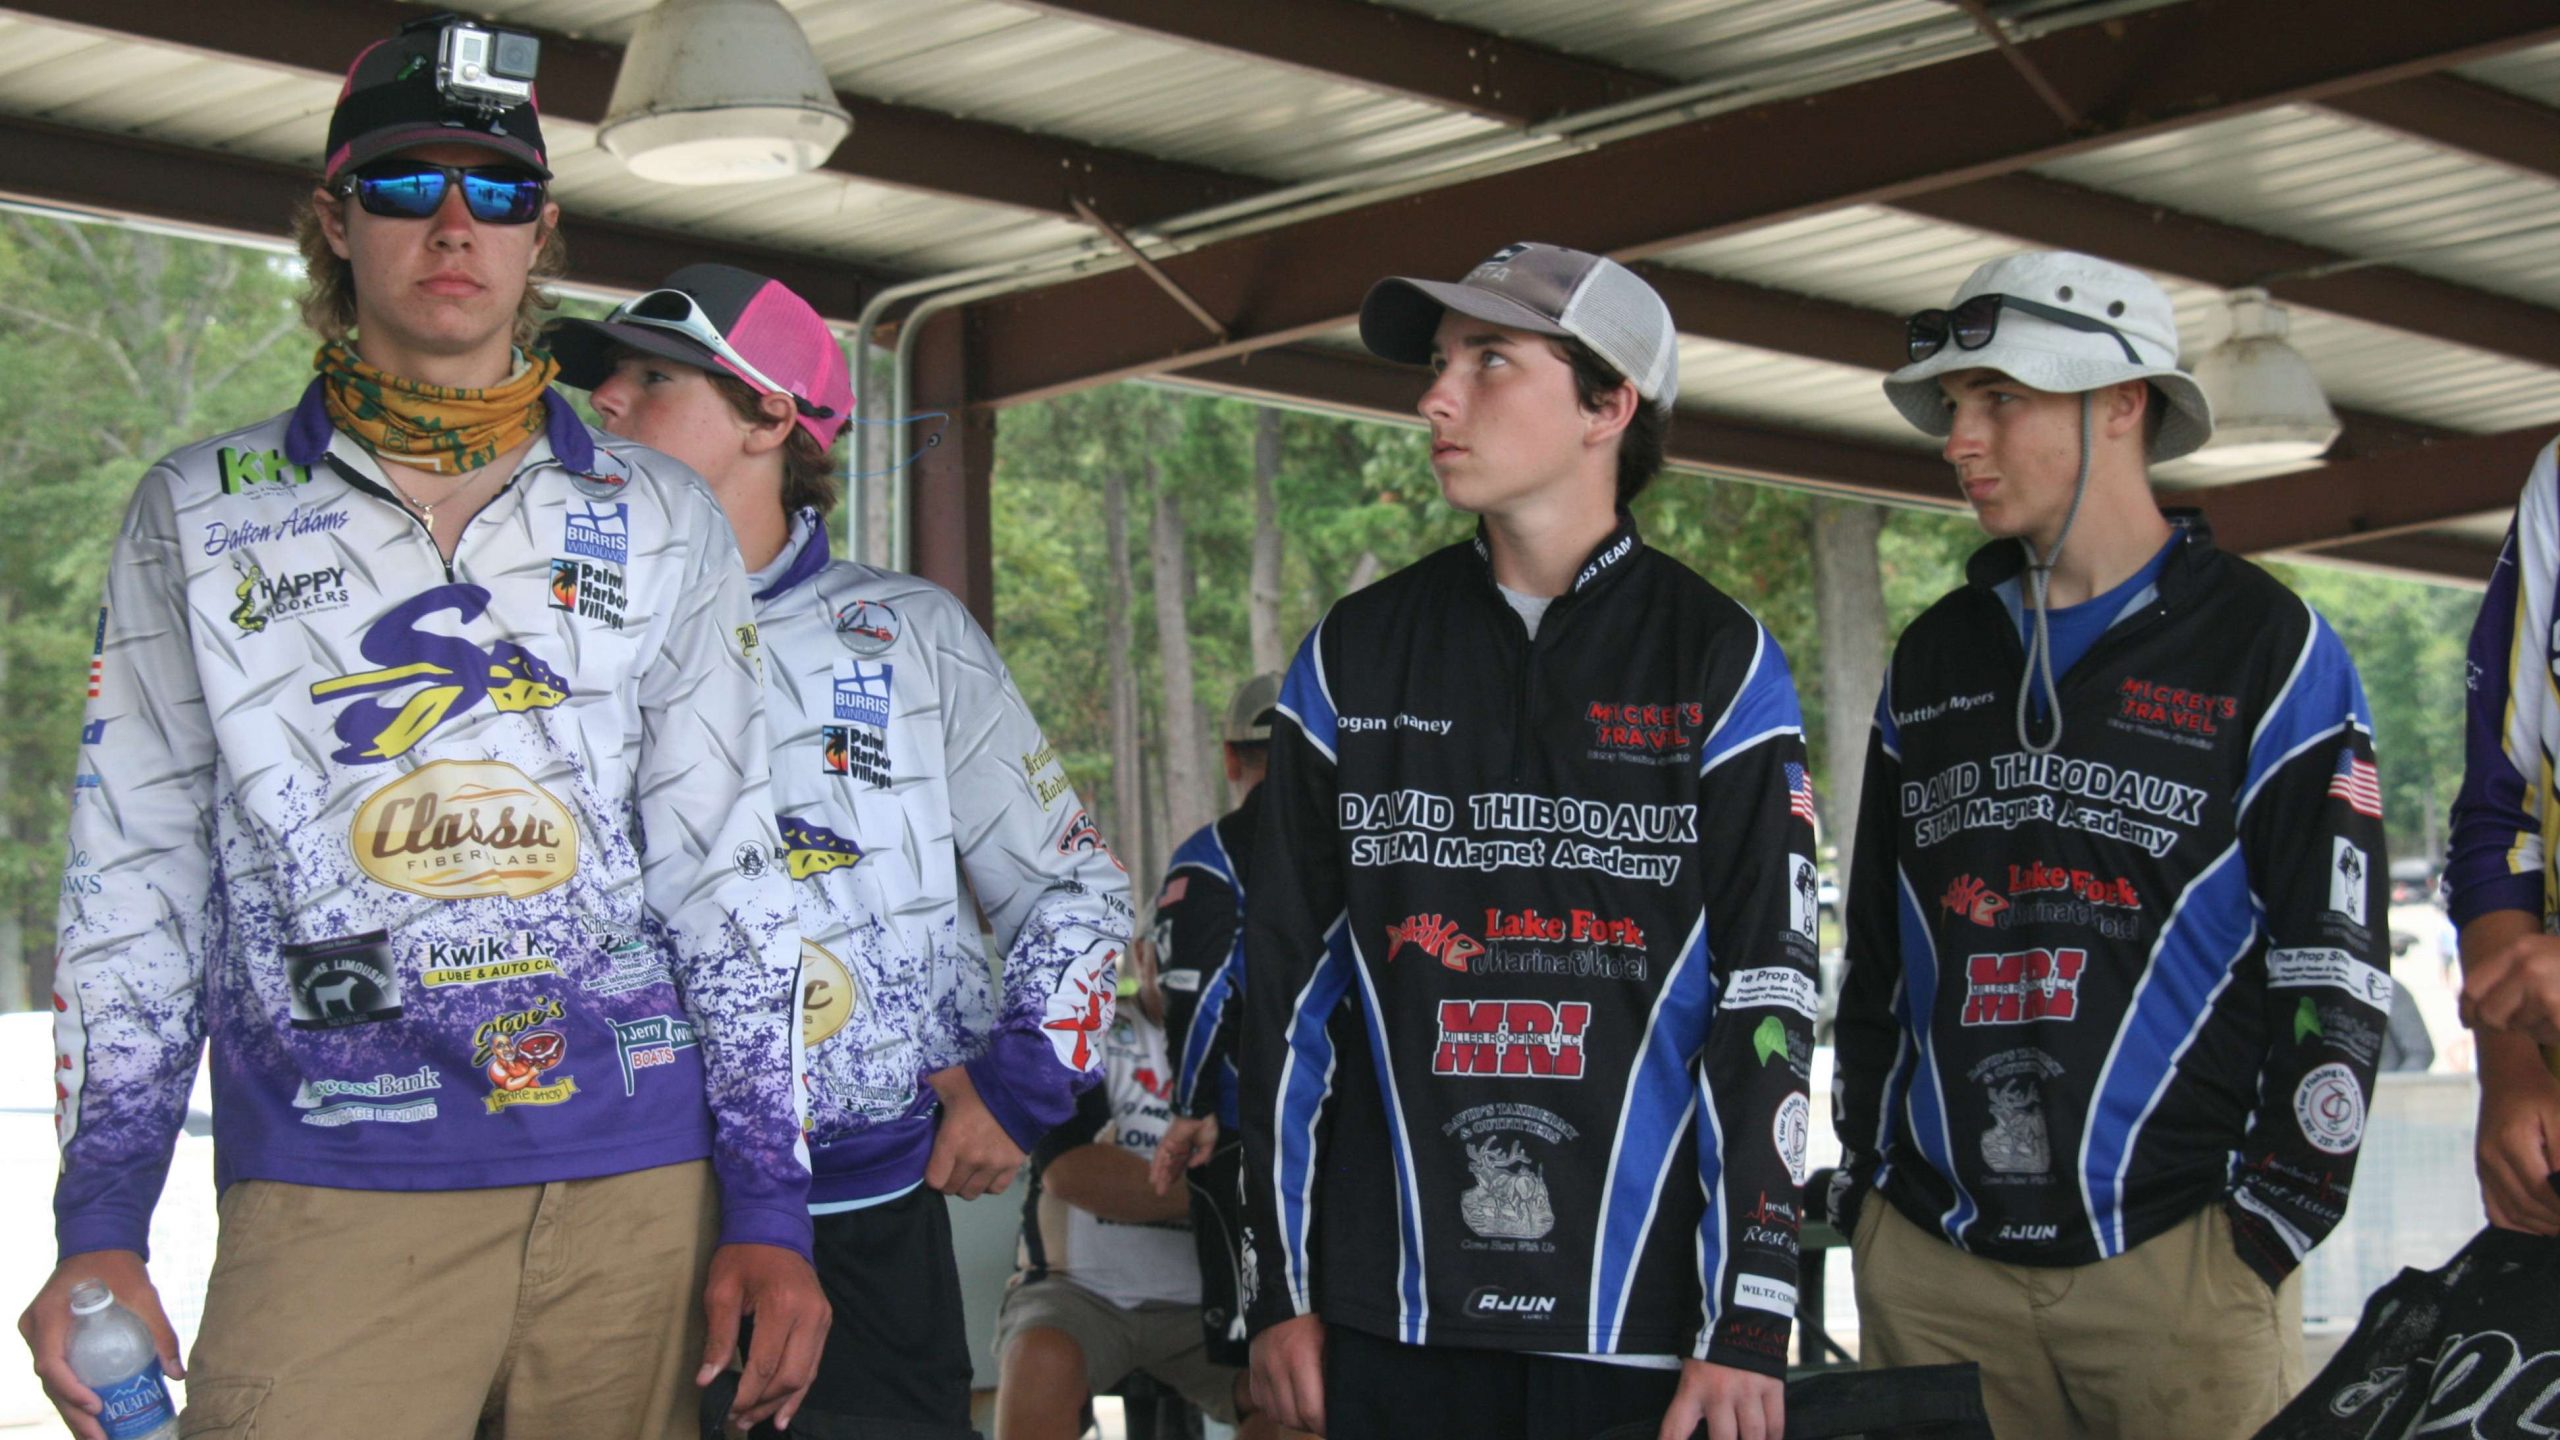 Hawkins and Adams of Sanger (Tex.) wait backstage to have their fish checked. They are joined by Logan Chaney and Matthew Myers of the David Thibodeaux (La.) Bass Team at the tanks.